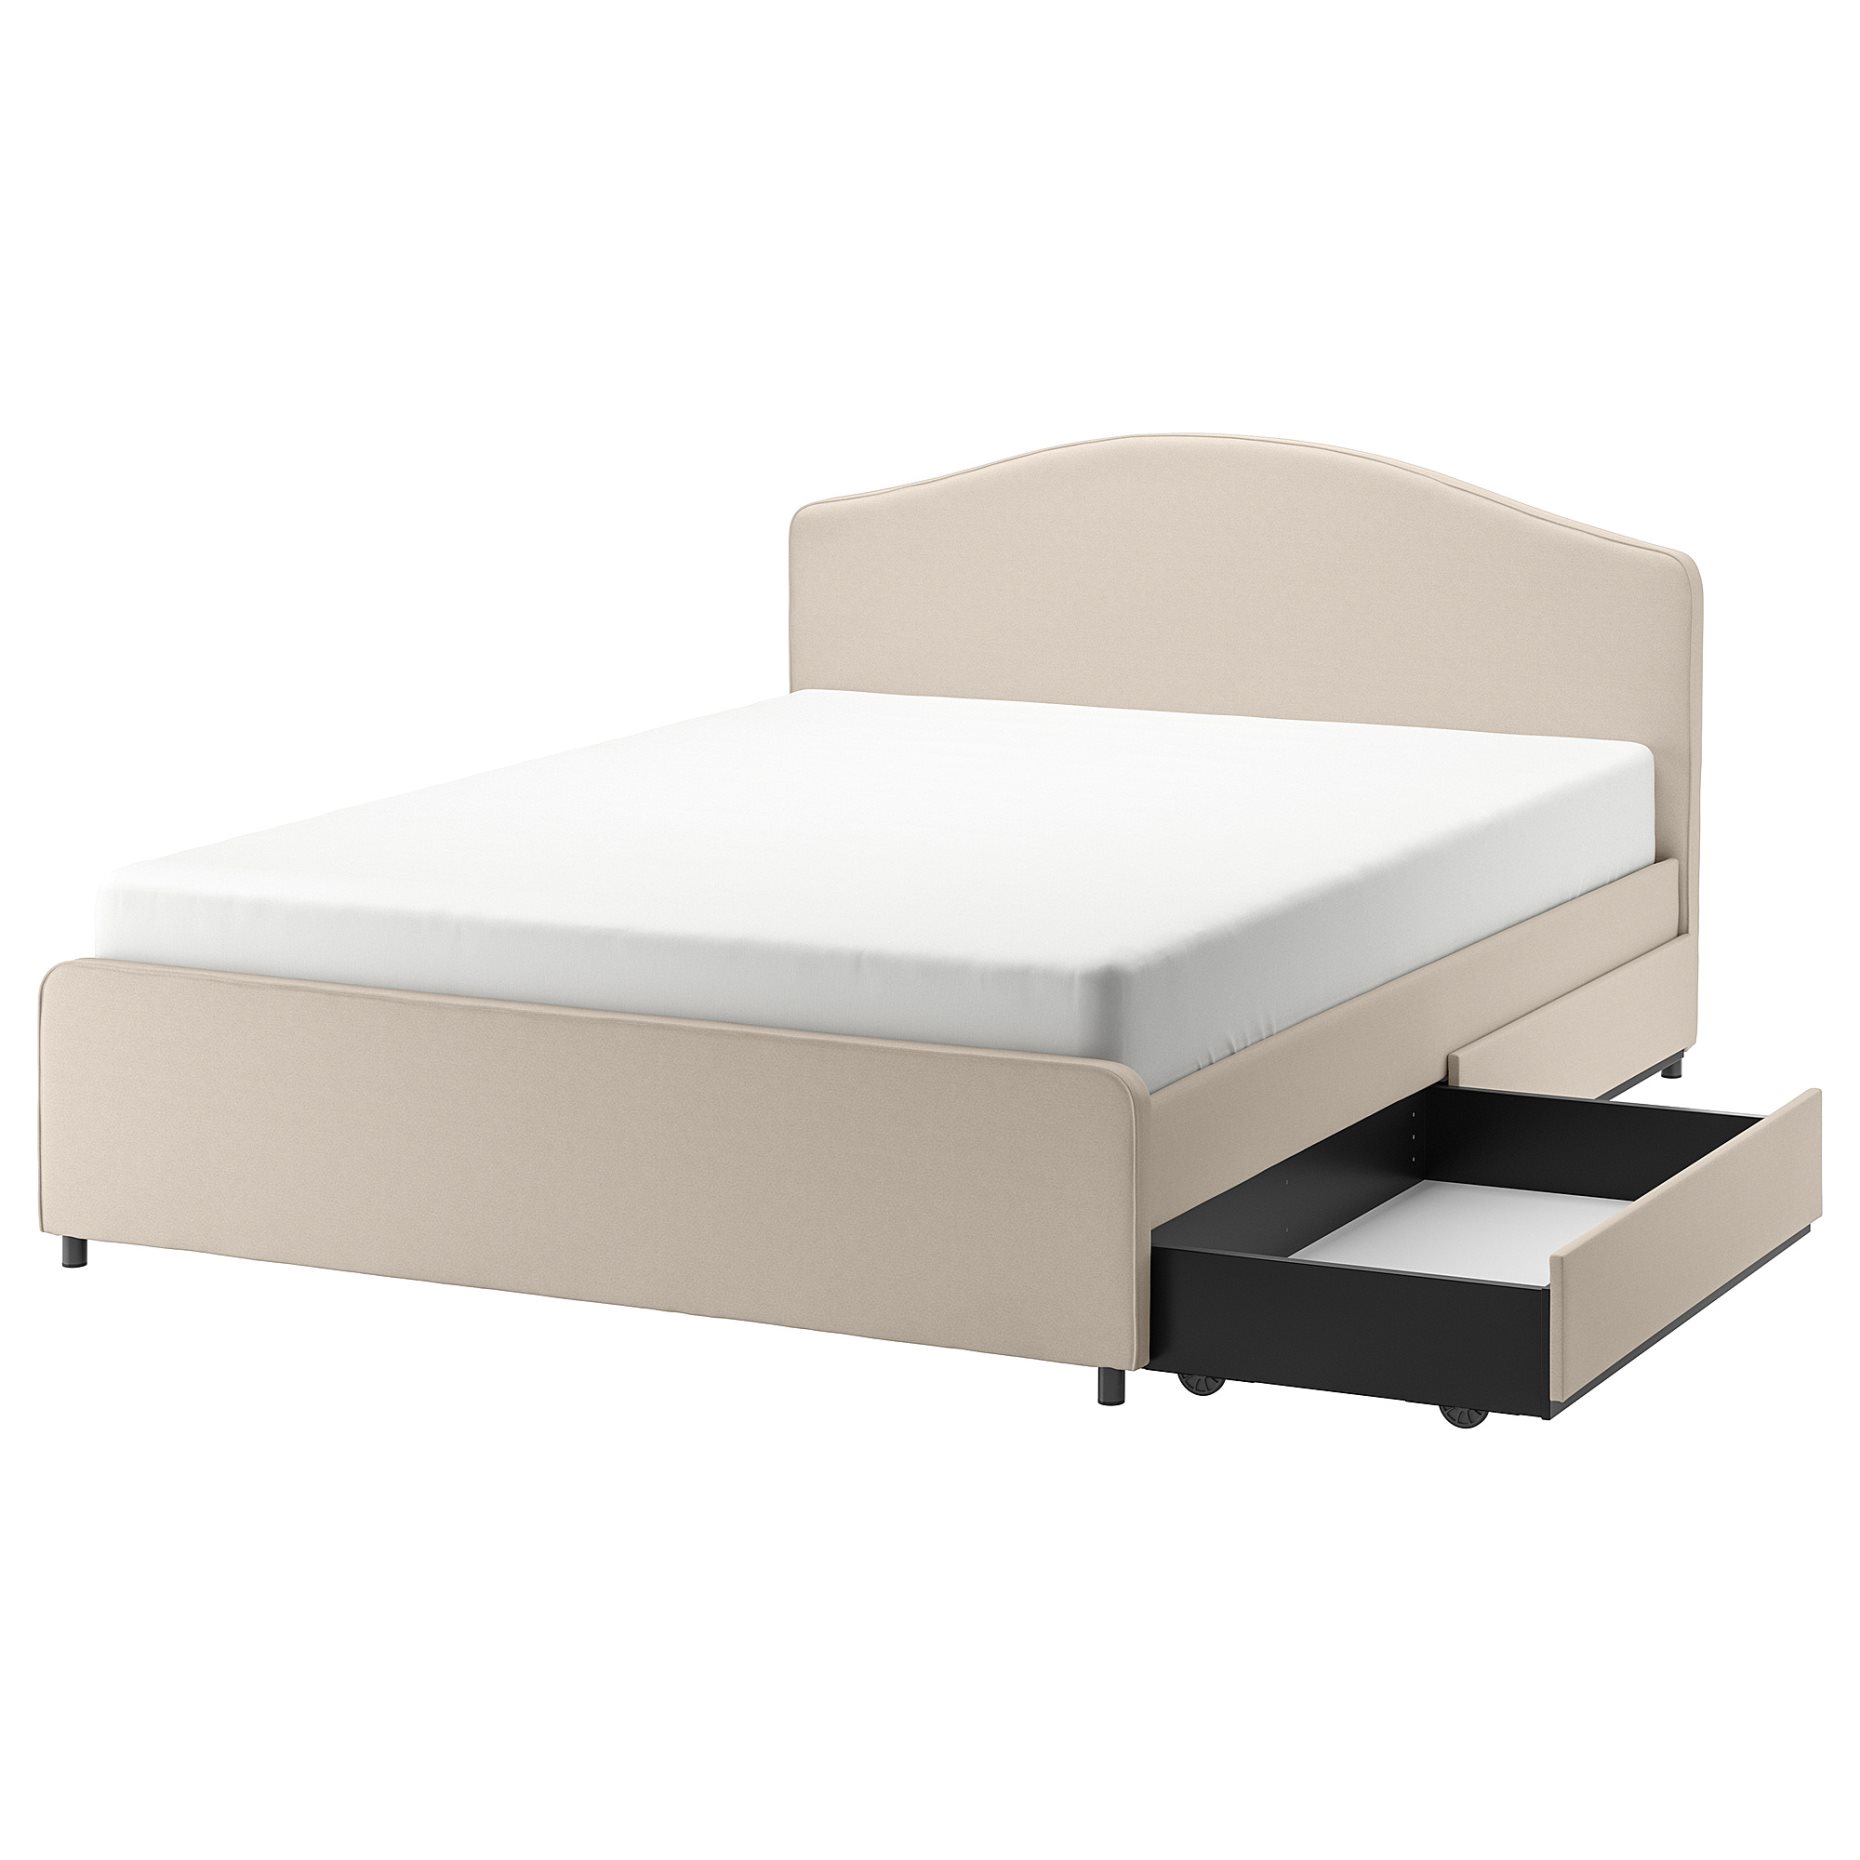 HAUGA, upholstered bed/ 2 storage boxes, 160X200 cm, 093.366.49